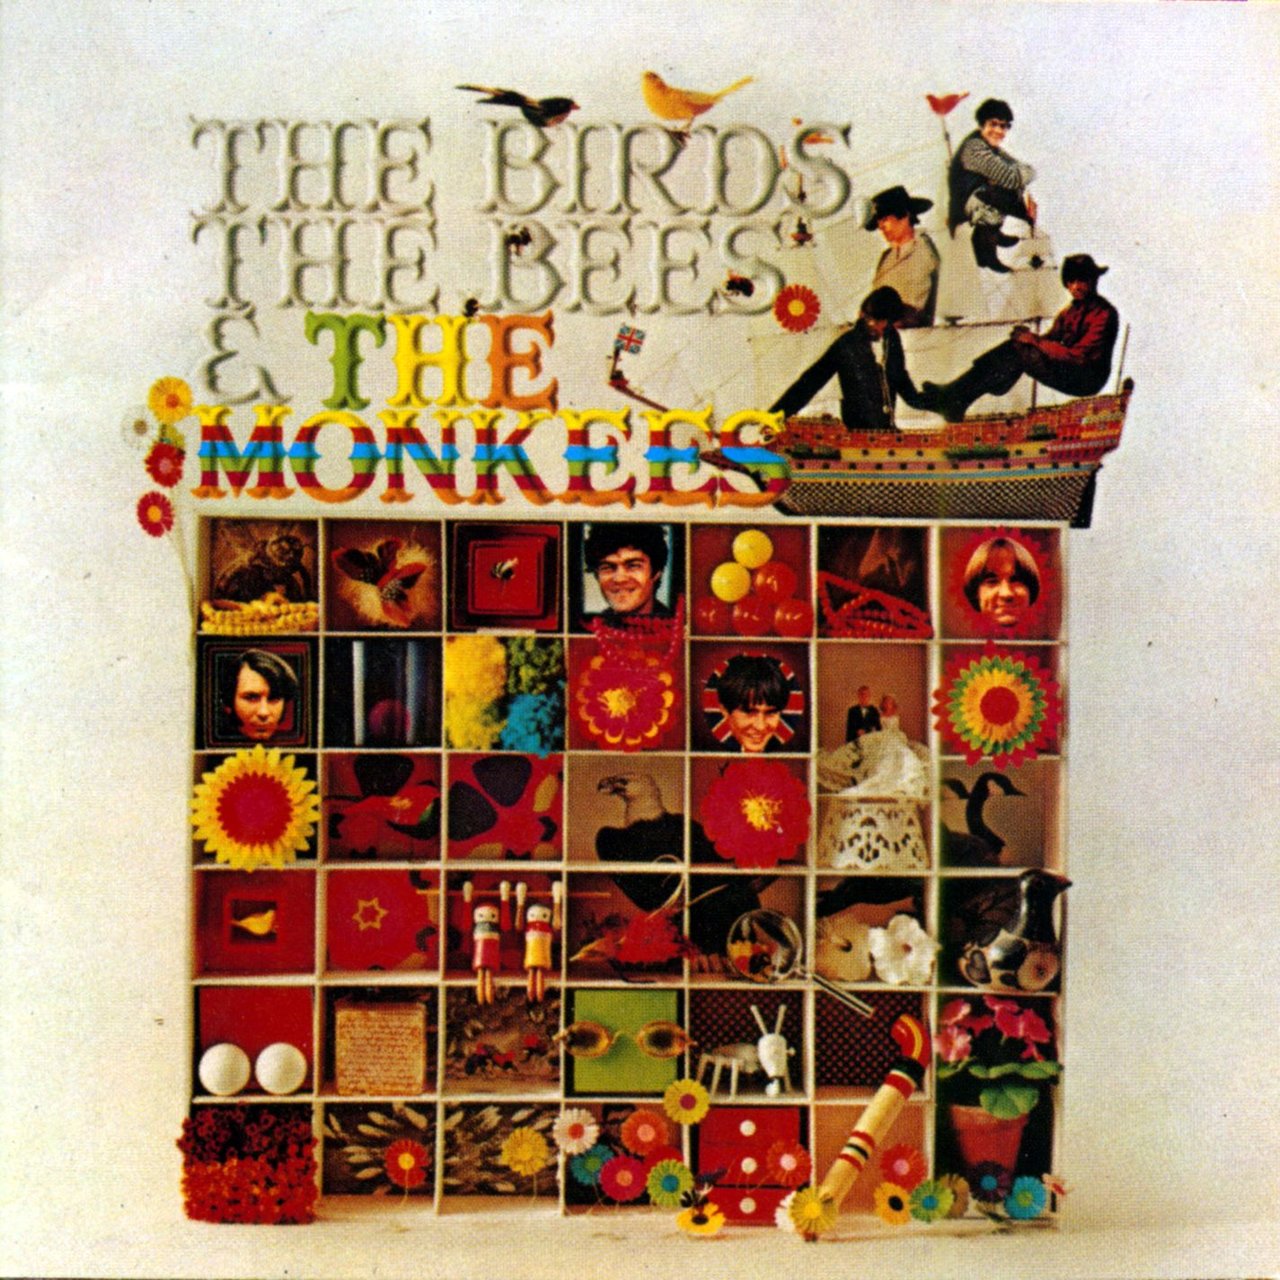 The Monkees - The Birds, The Bees, & The Monkees [1968]